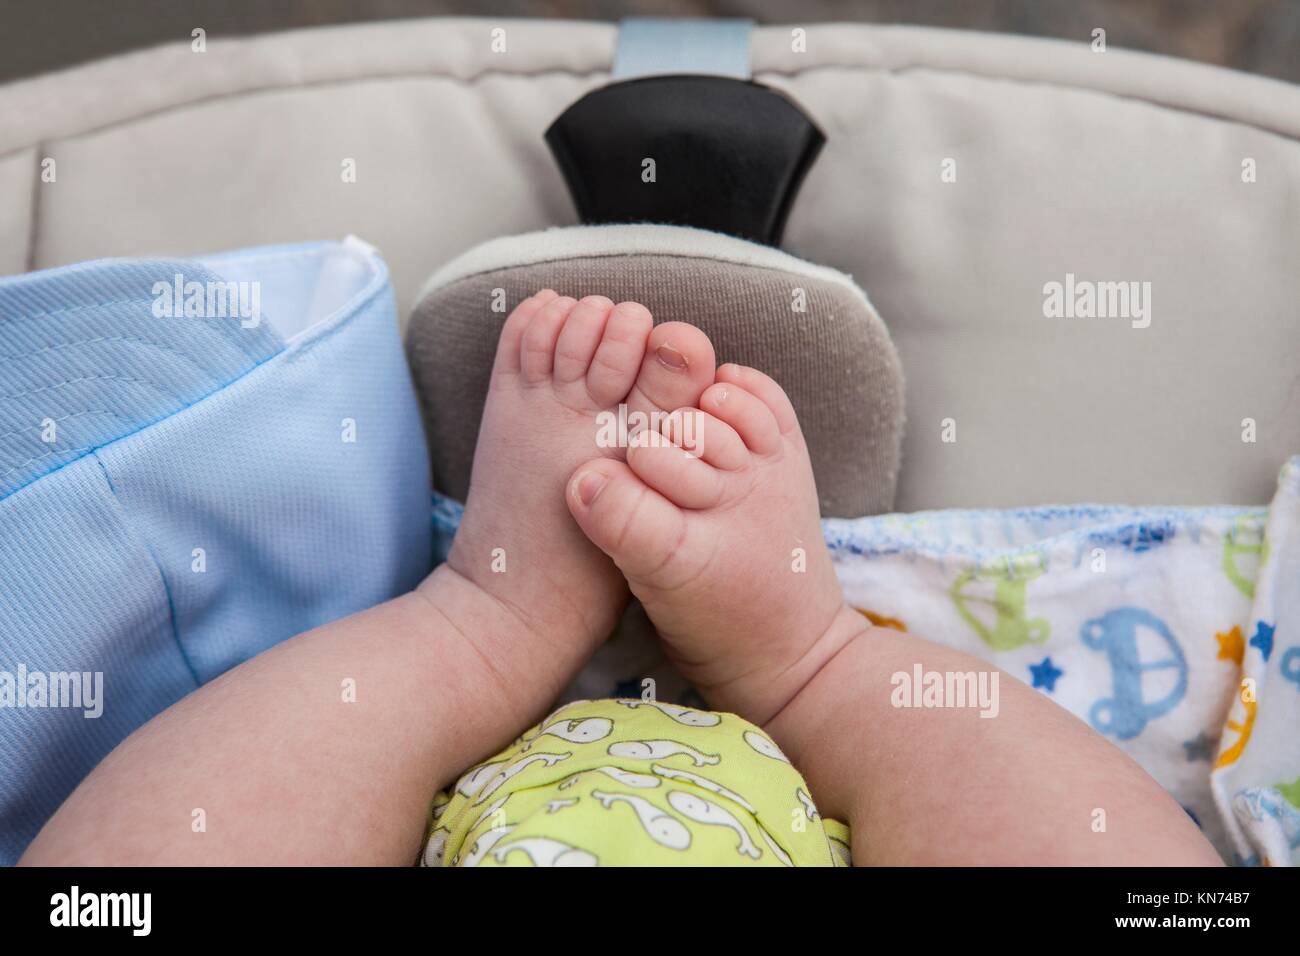 Chubby feet of a newborn baby boy in stroller while on a walk outside in the street. Stock Photo